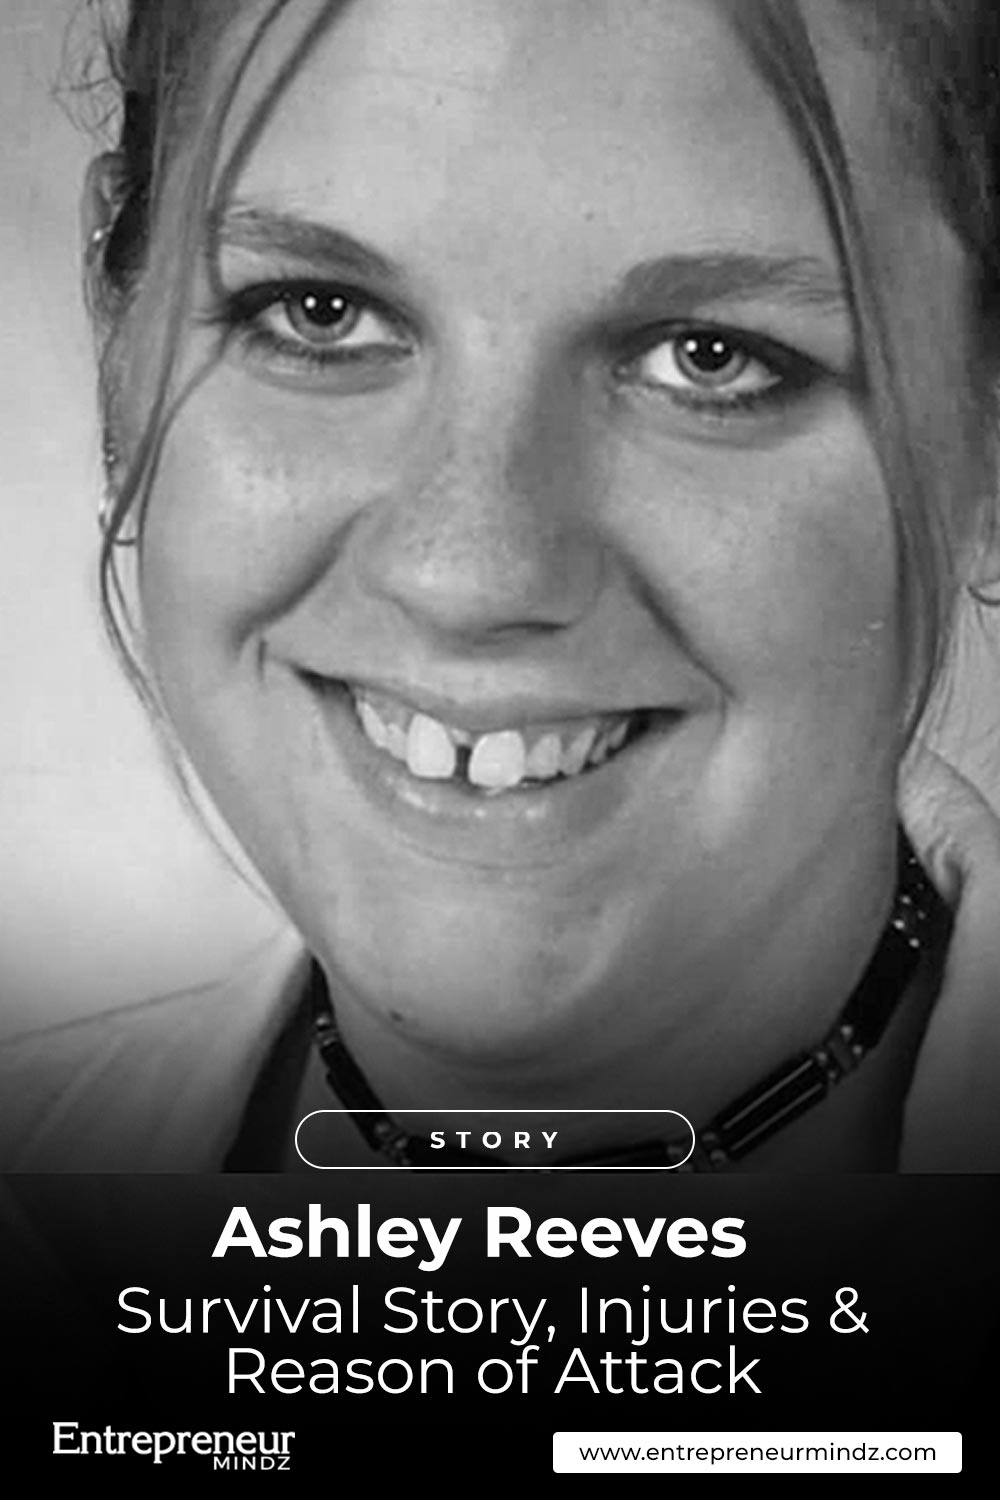 Ashley Reeves story